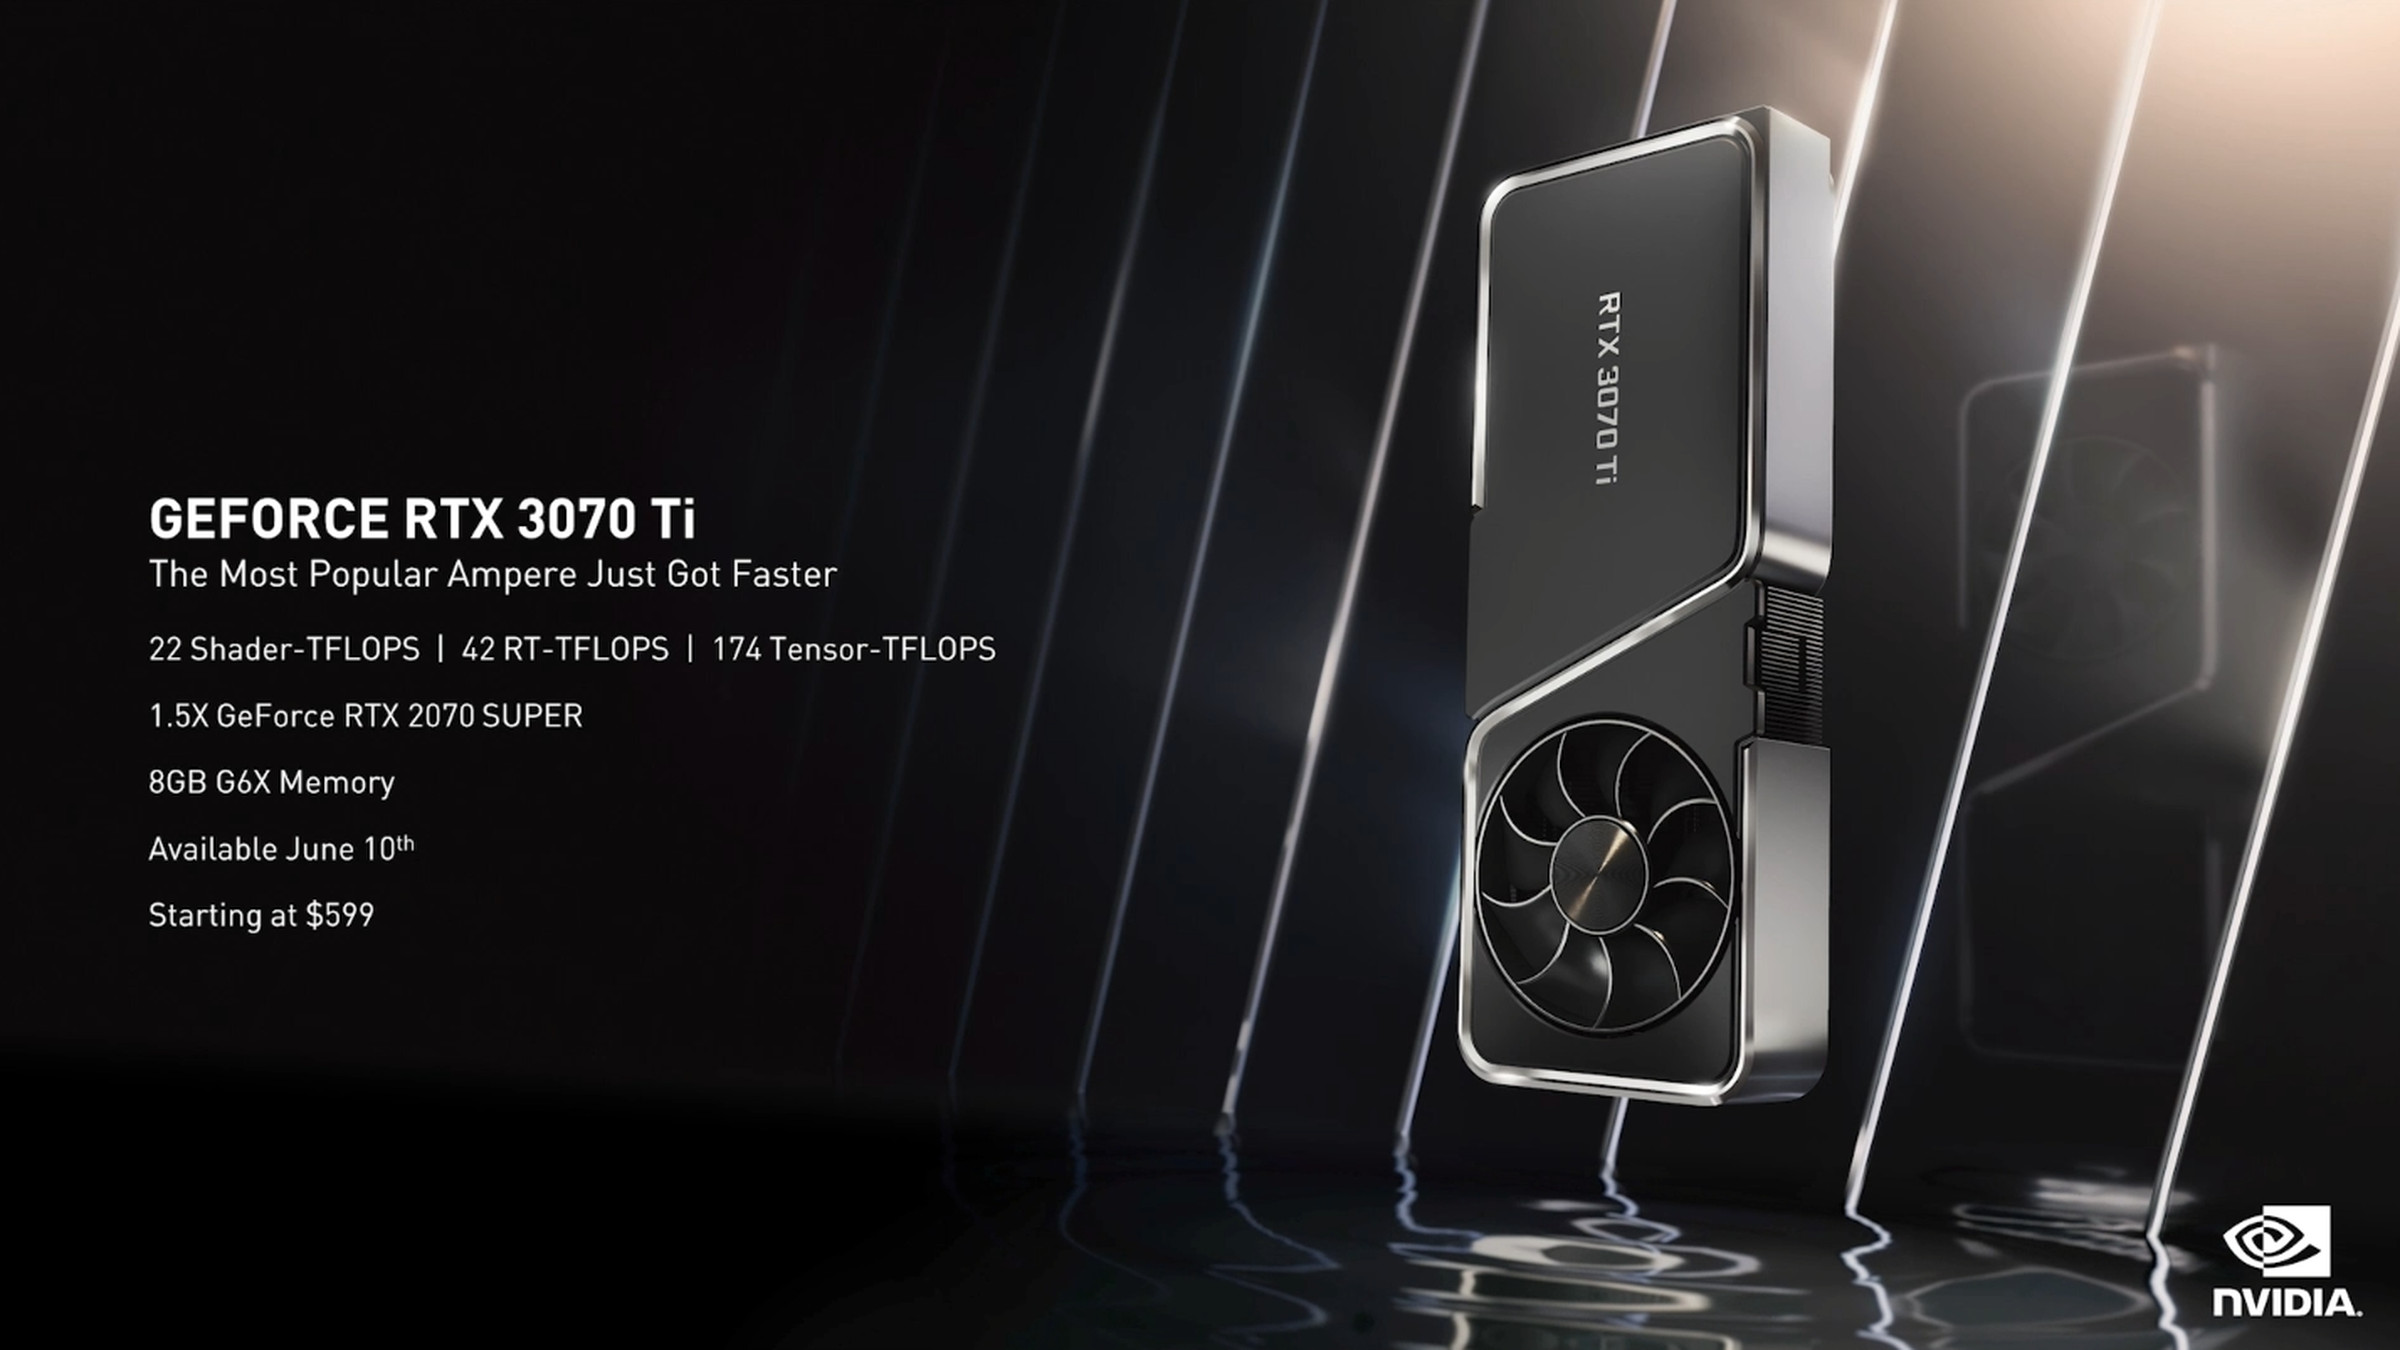 Nvidia’s RTX 3070 Ti also arrives this month.